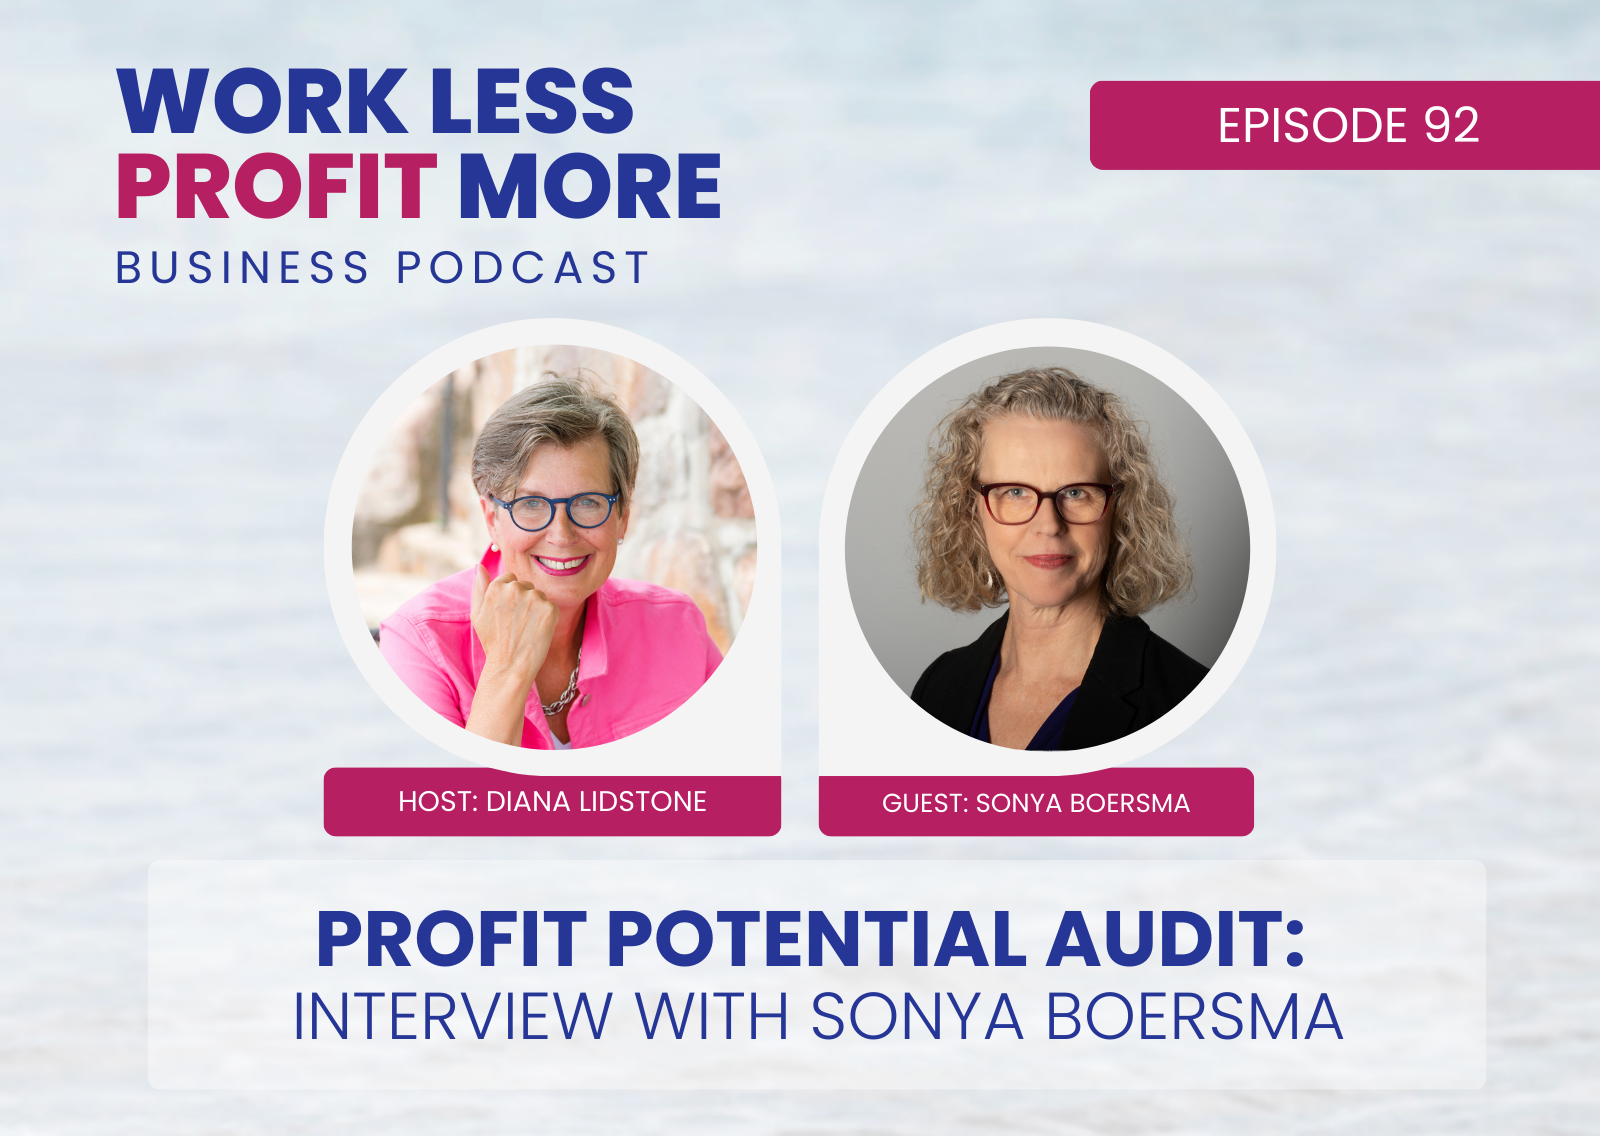 Profit Potential Audit - Interview with Sonya Boersma